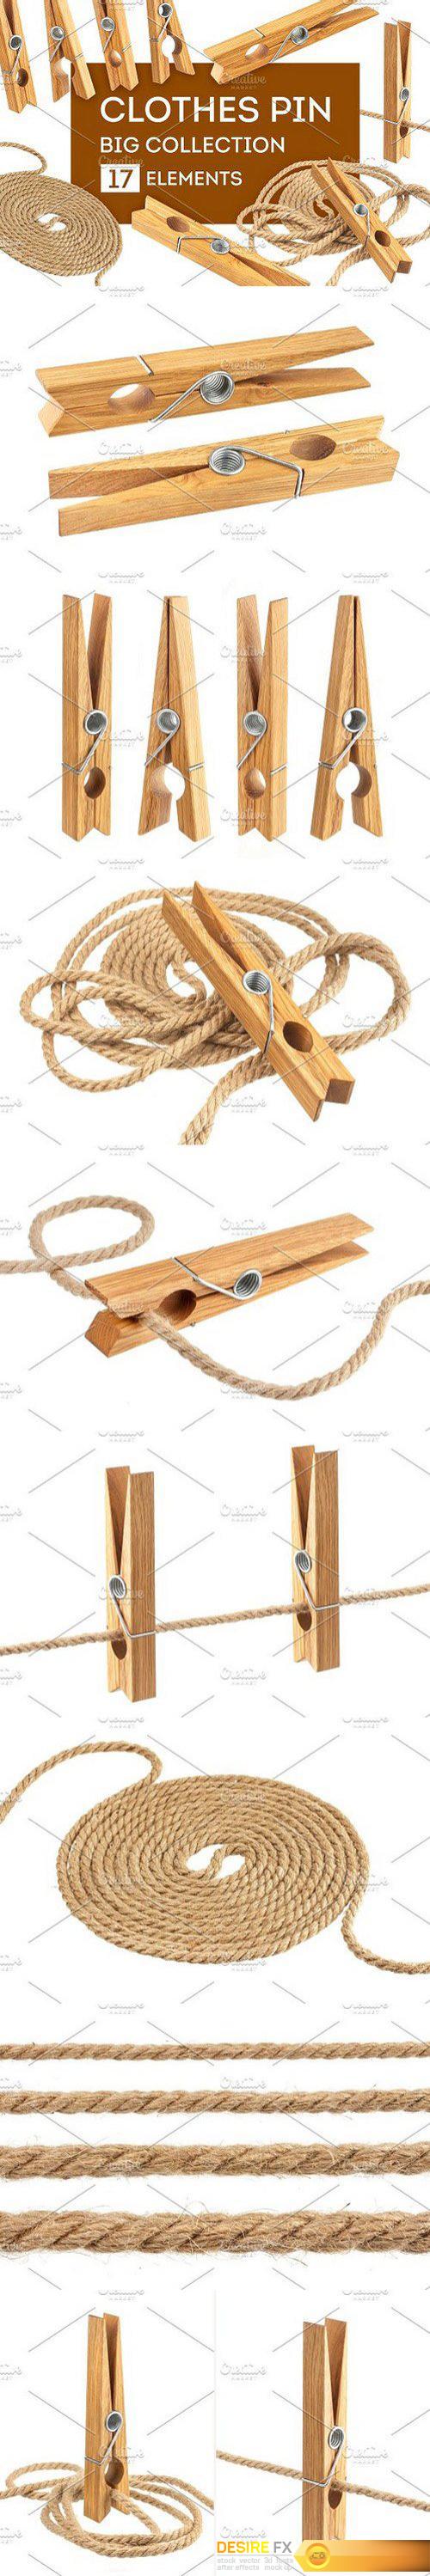 CM - Clothes pin and rope 1331394